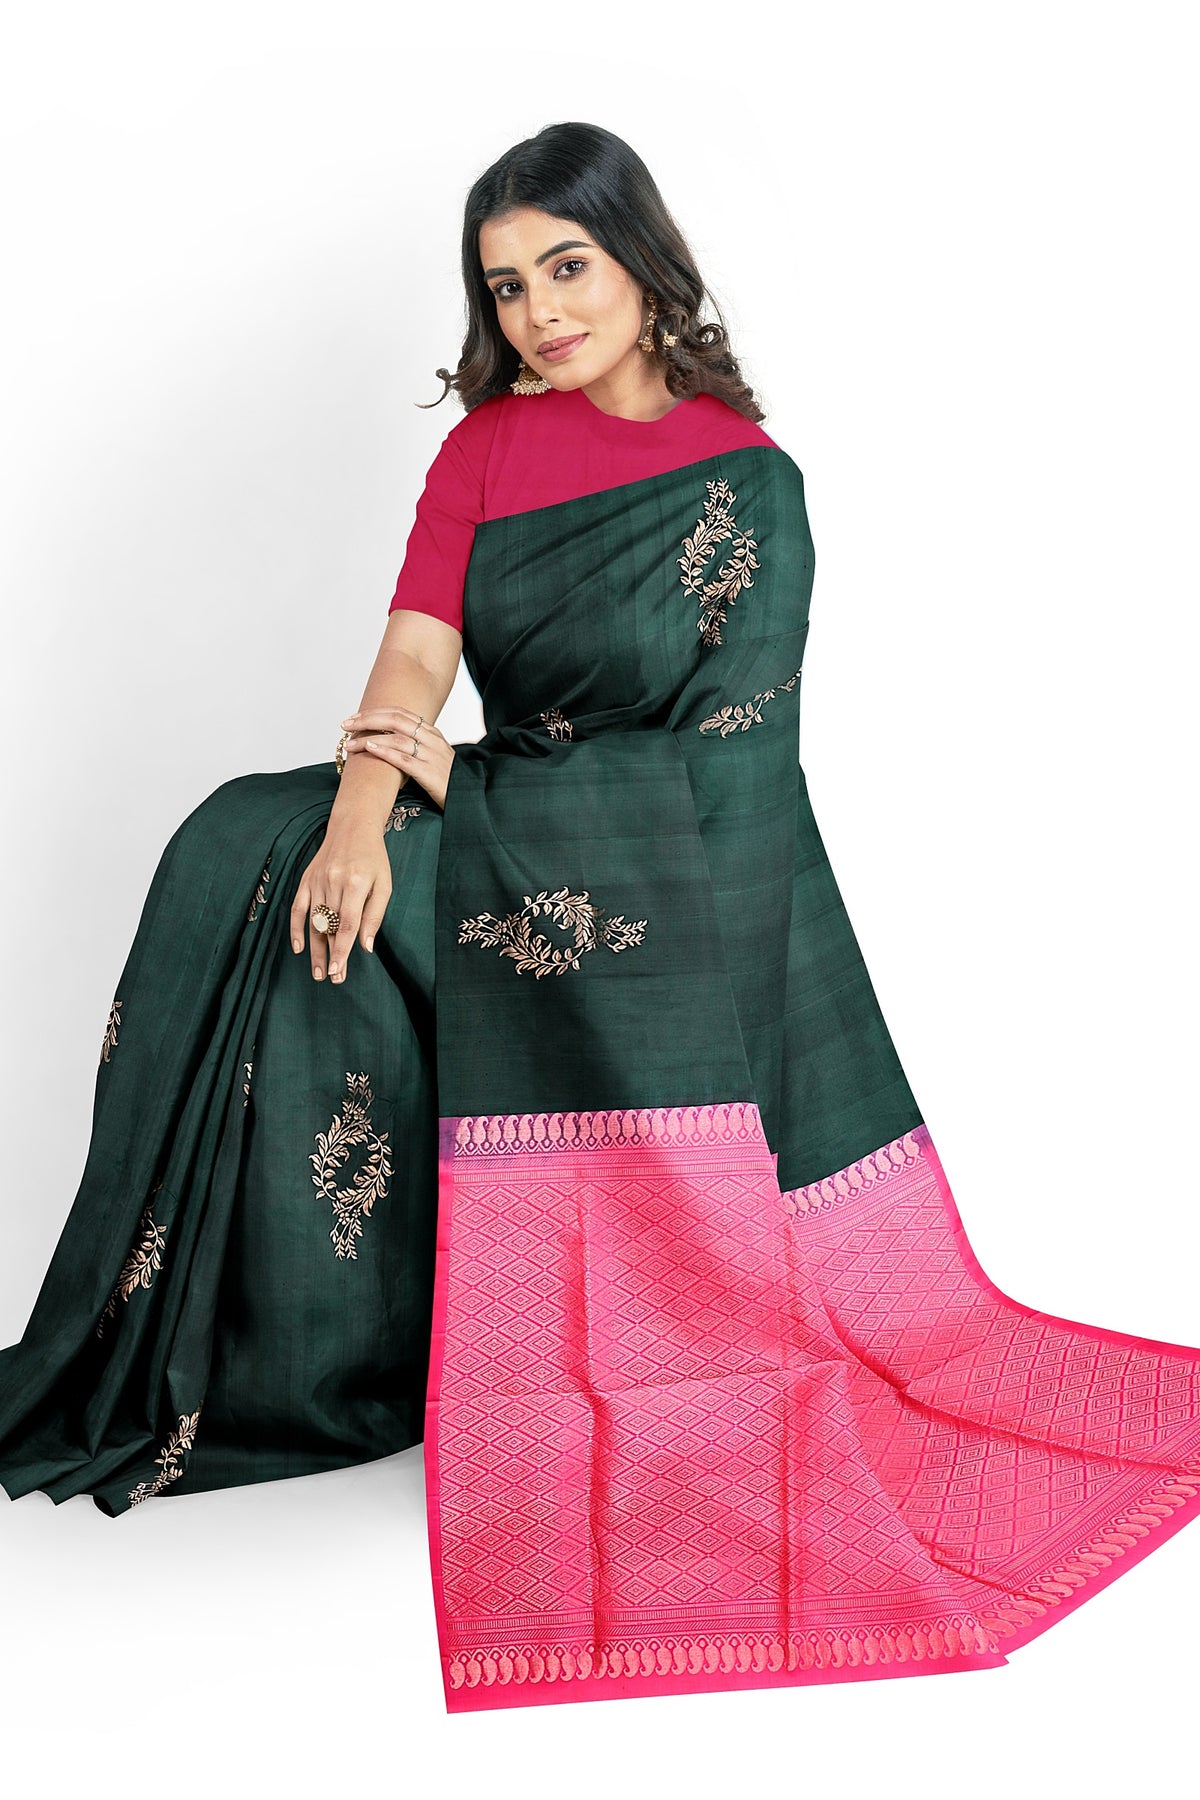 A model wearing a unique jungle green soft silk handloom saree with dark green body and rubine pink pallu. The saree is designed with floral motifs in gold zari works. The saree comes with a separate blouse material.